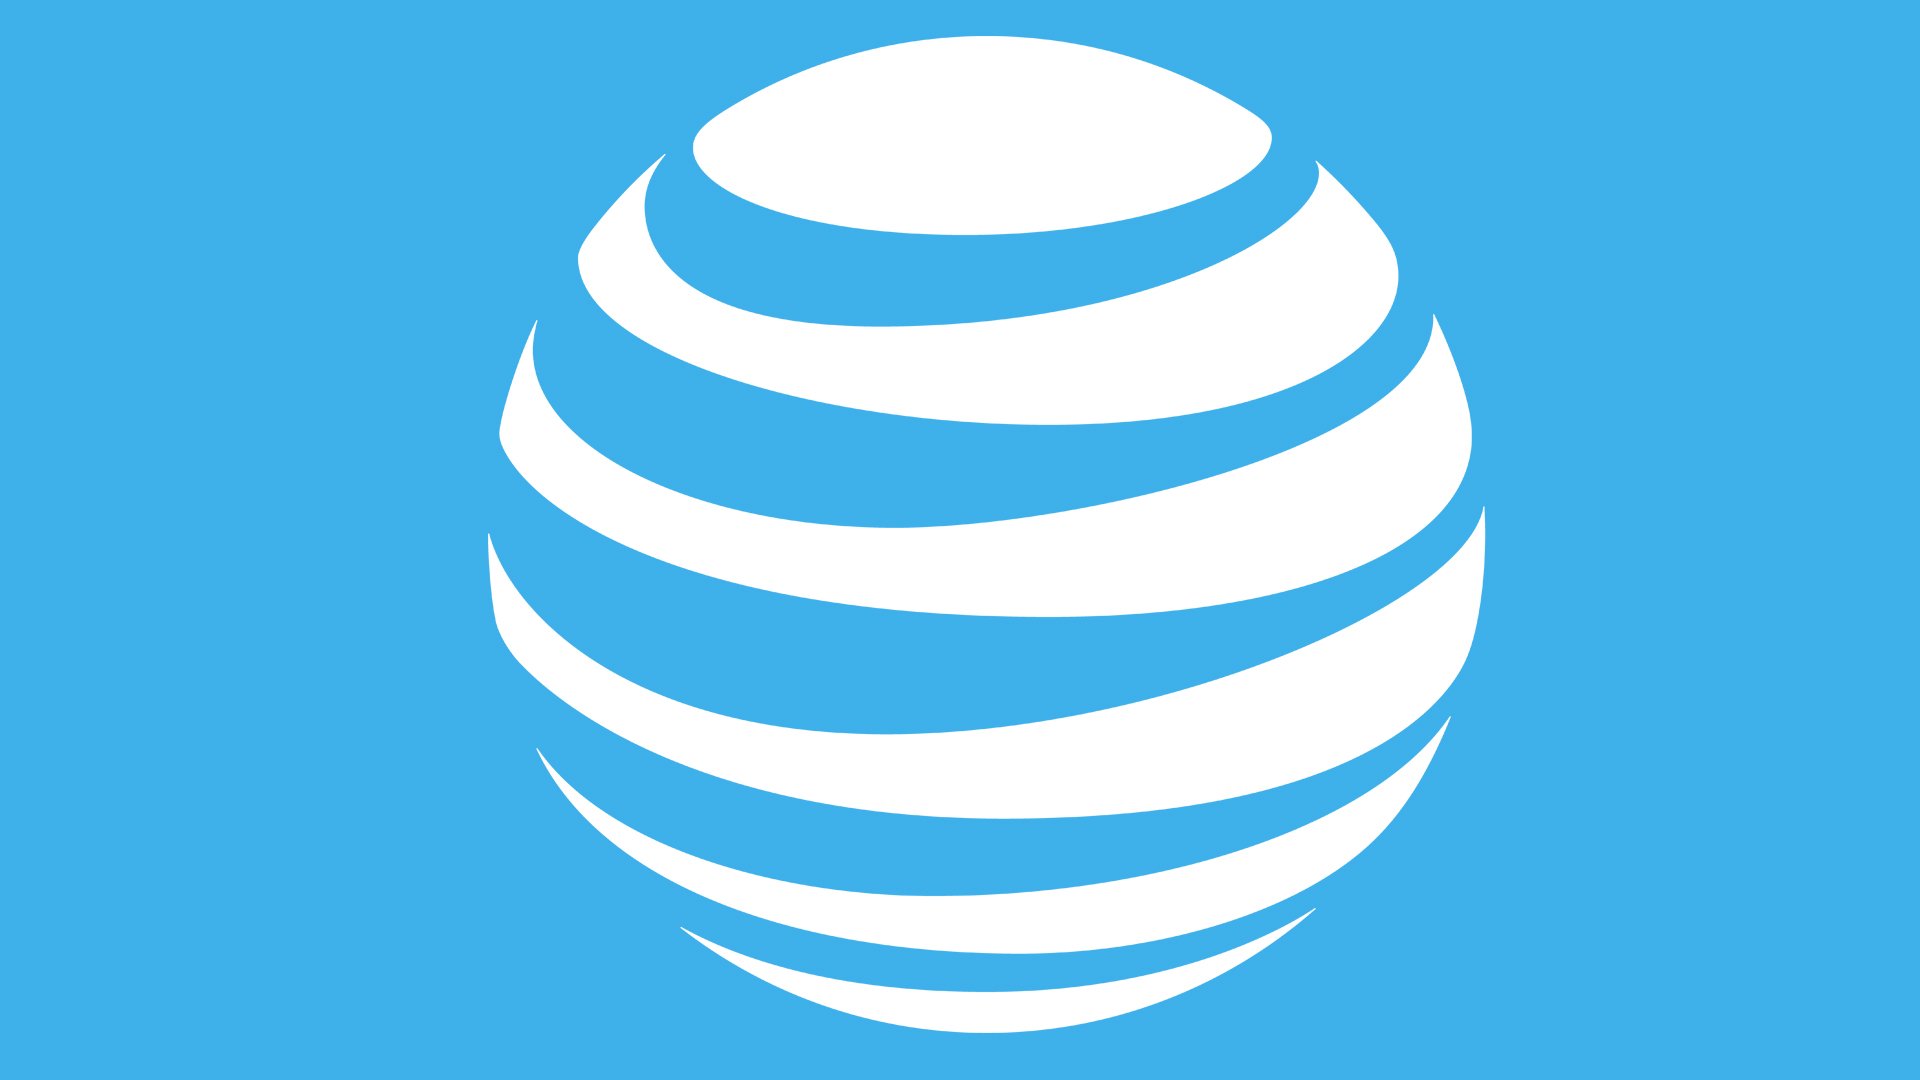 AT&T Logo, AT&T Symbol Meaning, History and Evolution